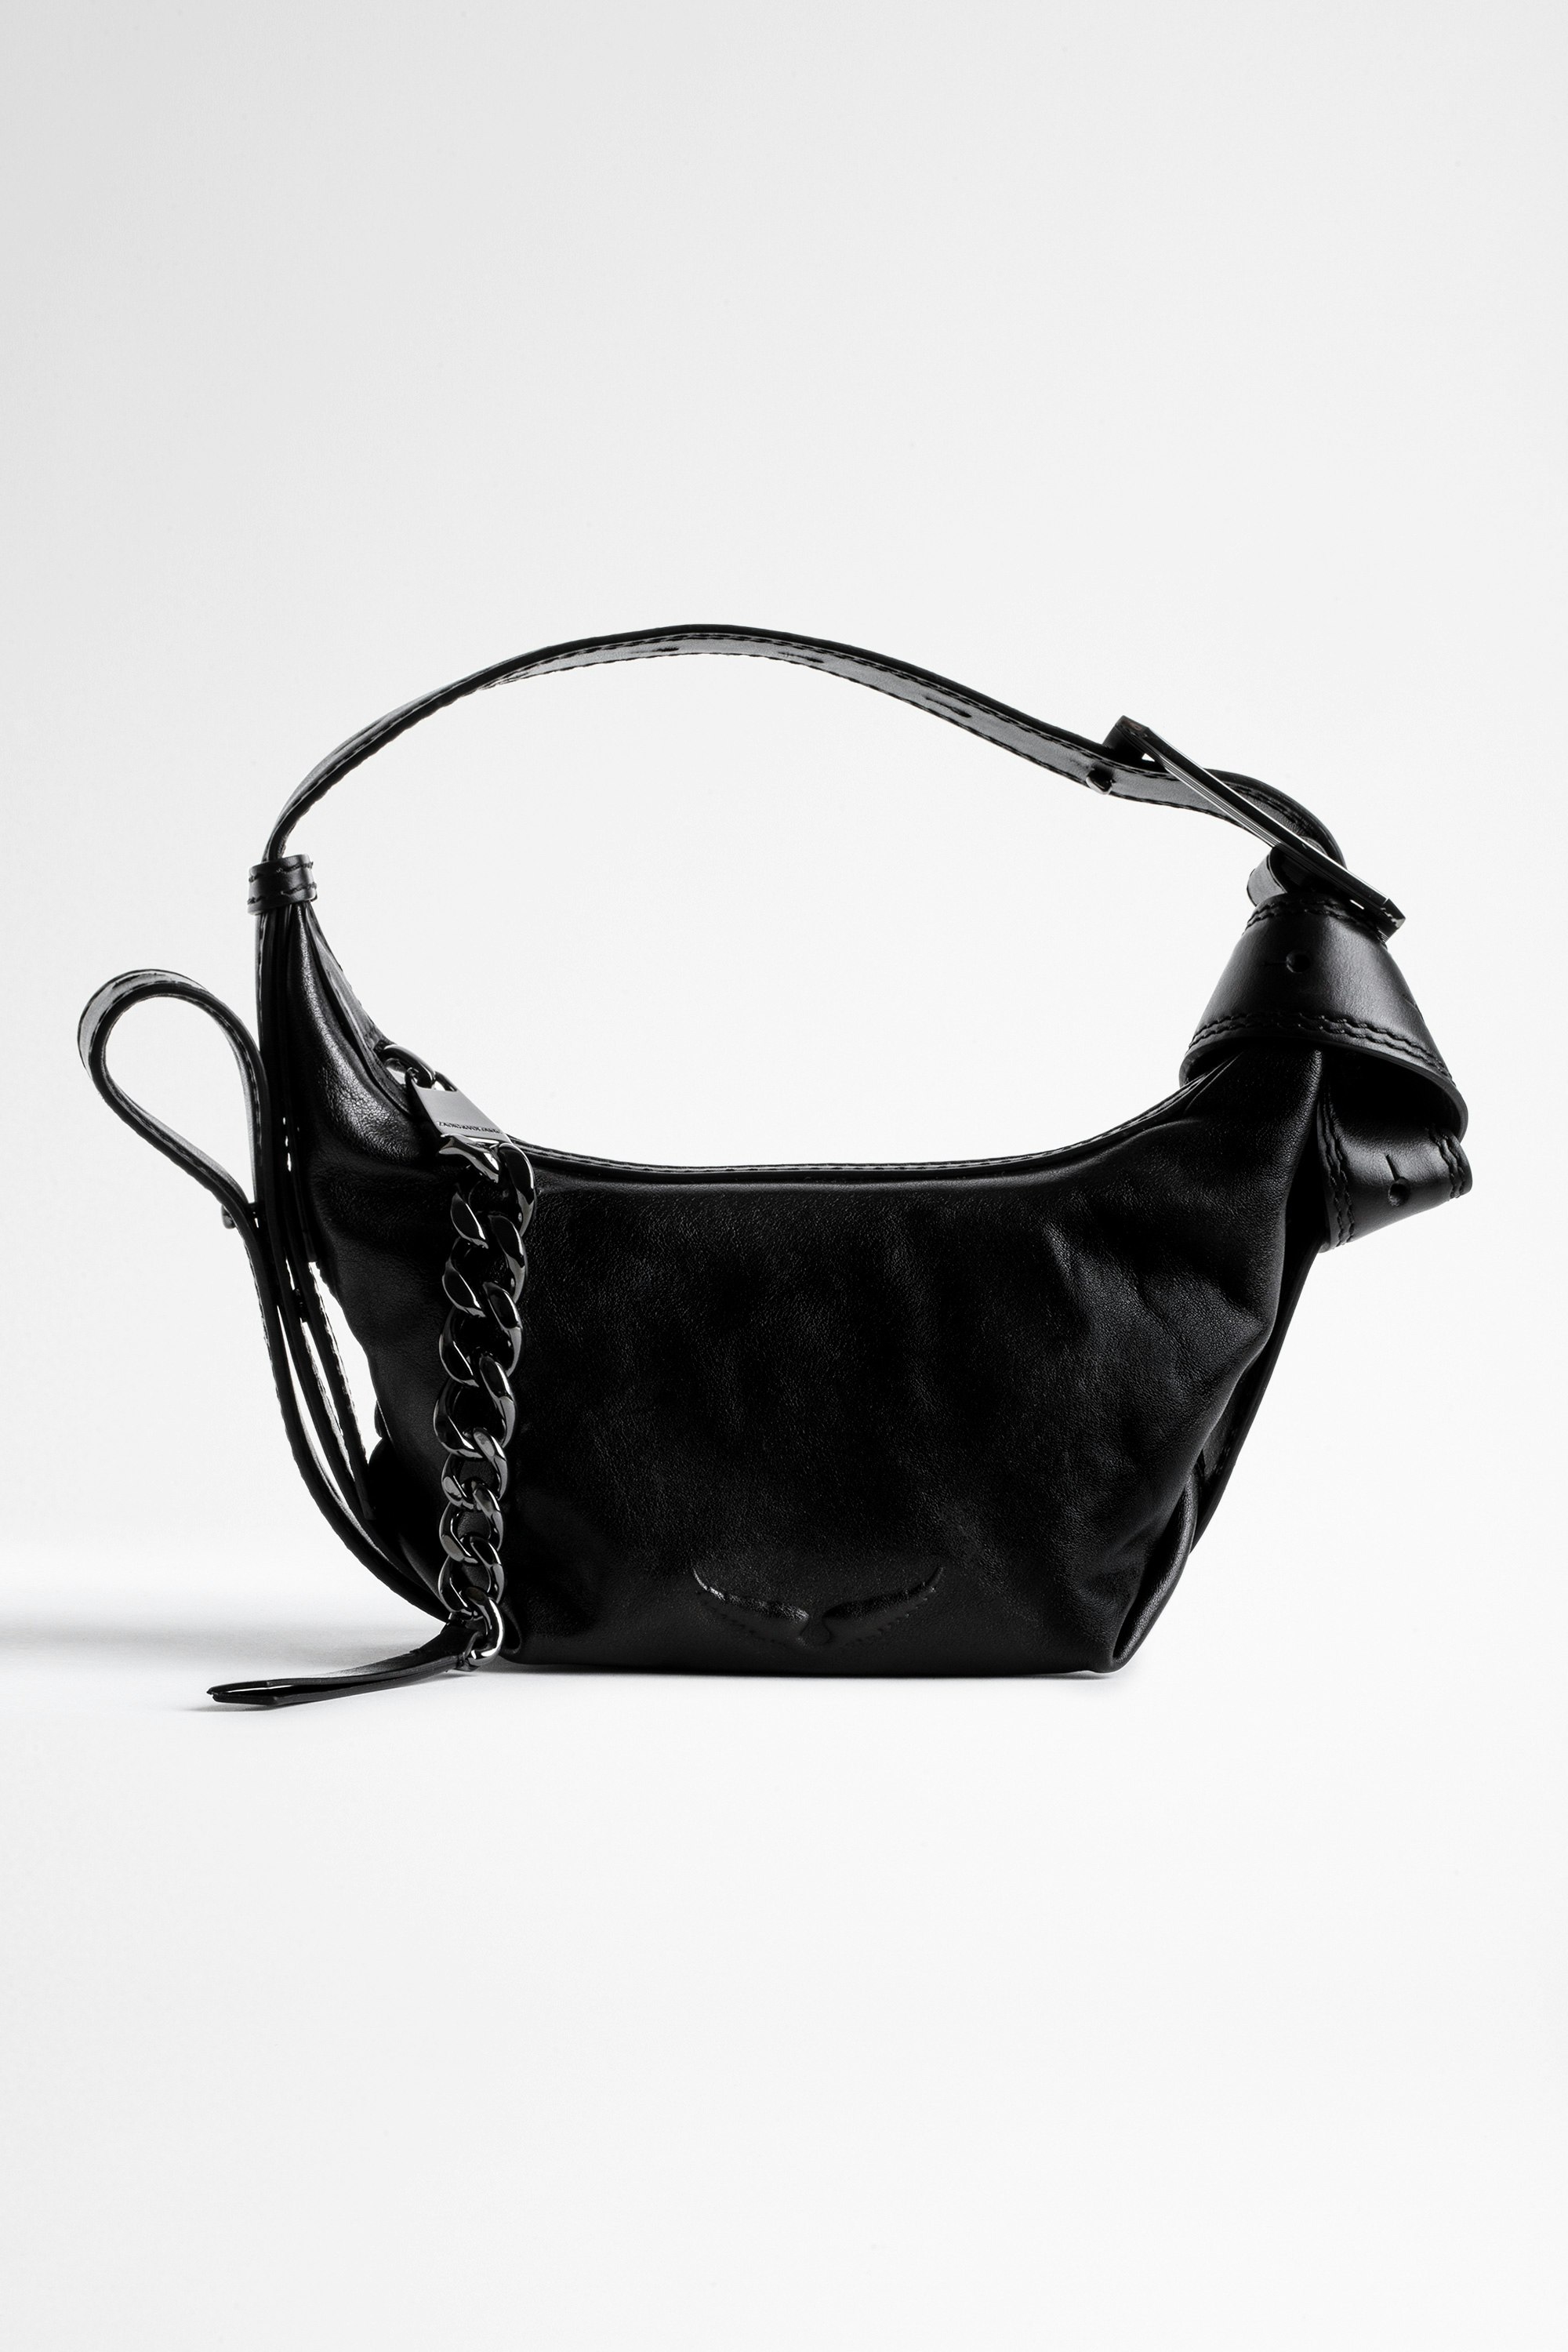 Le Cecilia XS Bag Cecilia XS bag in black vegetable dyeing leather